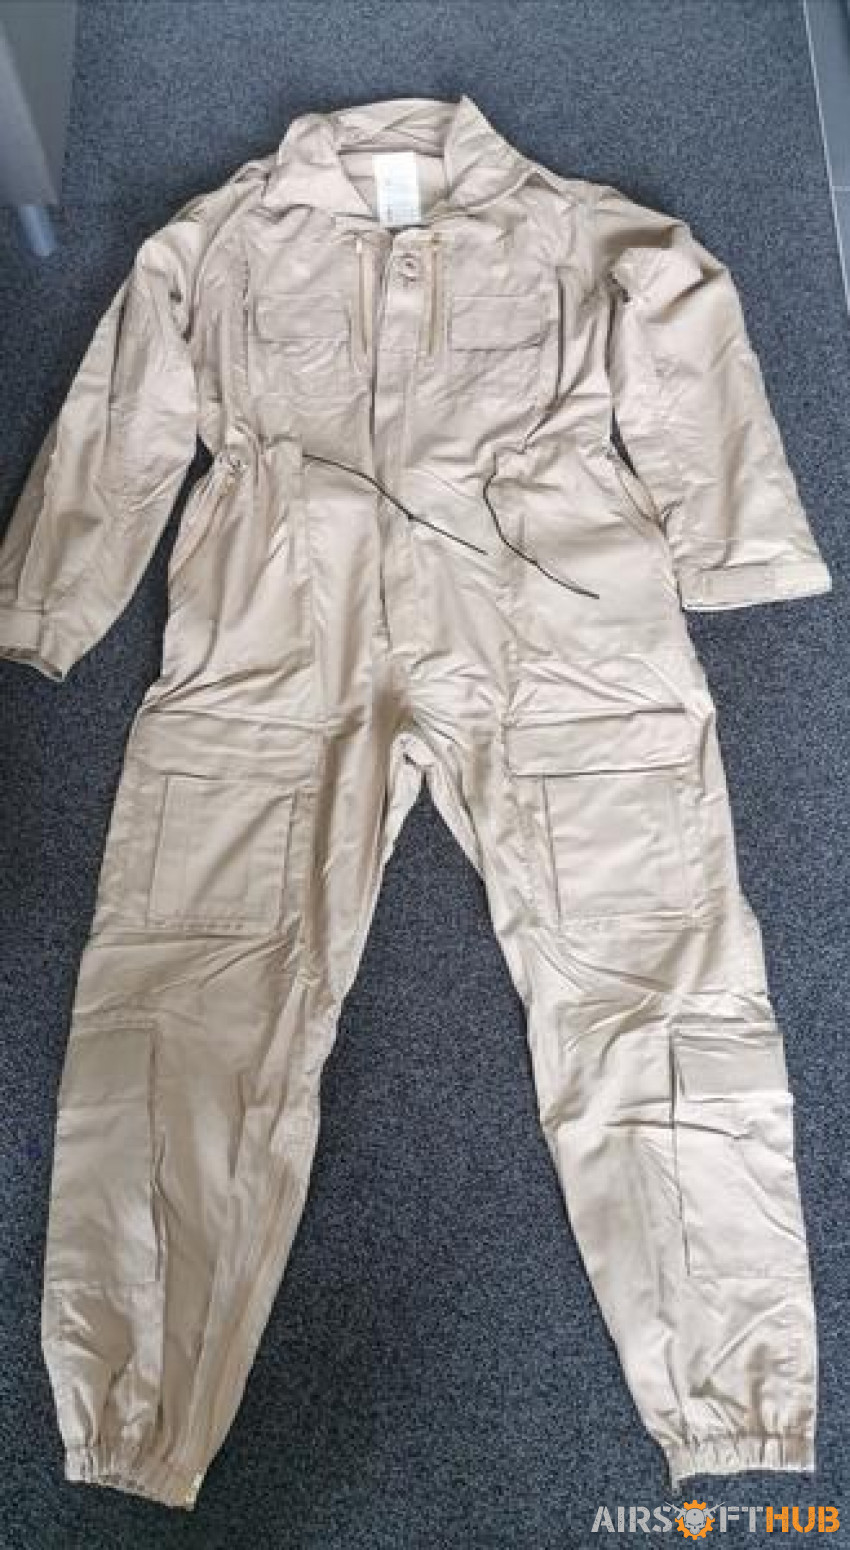 Aircrew Coverall in Tan - Used airsoft equipment